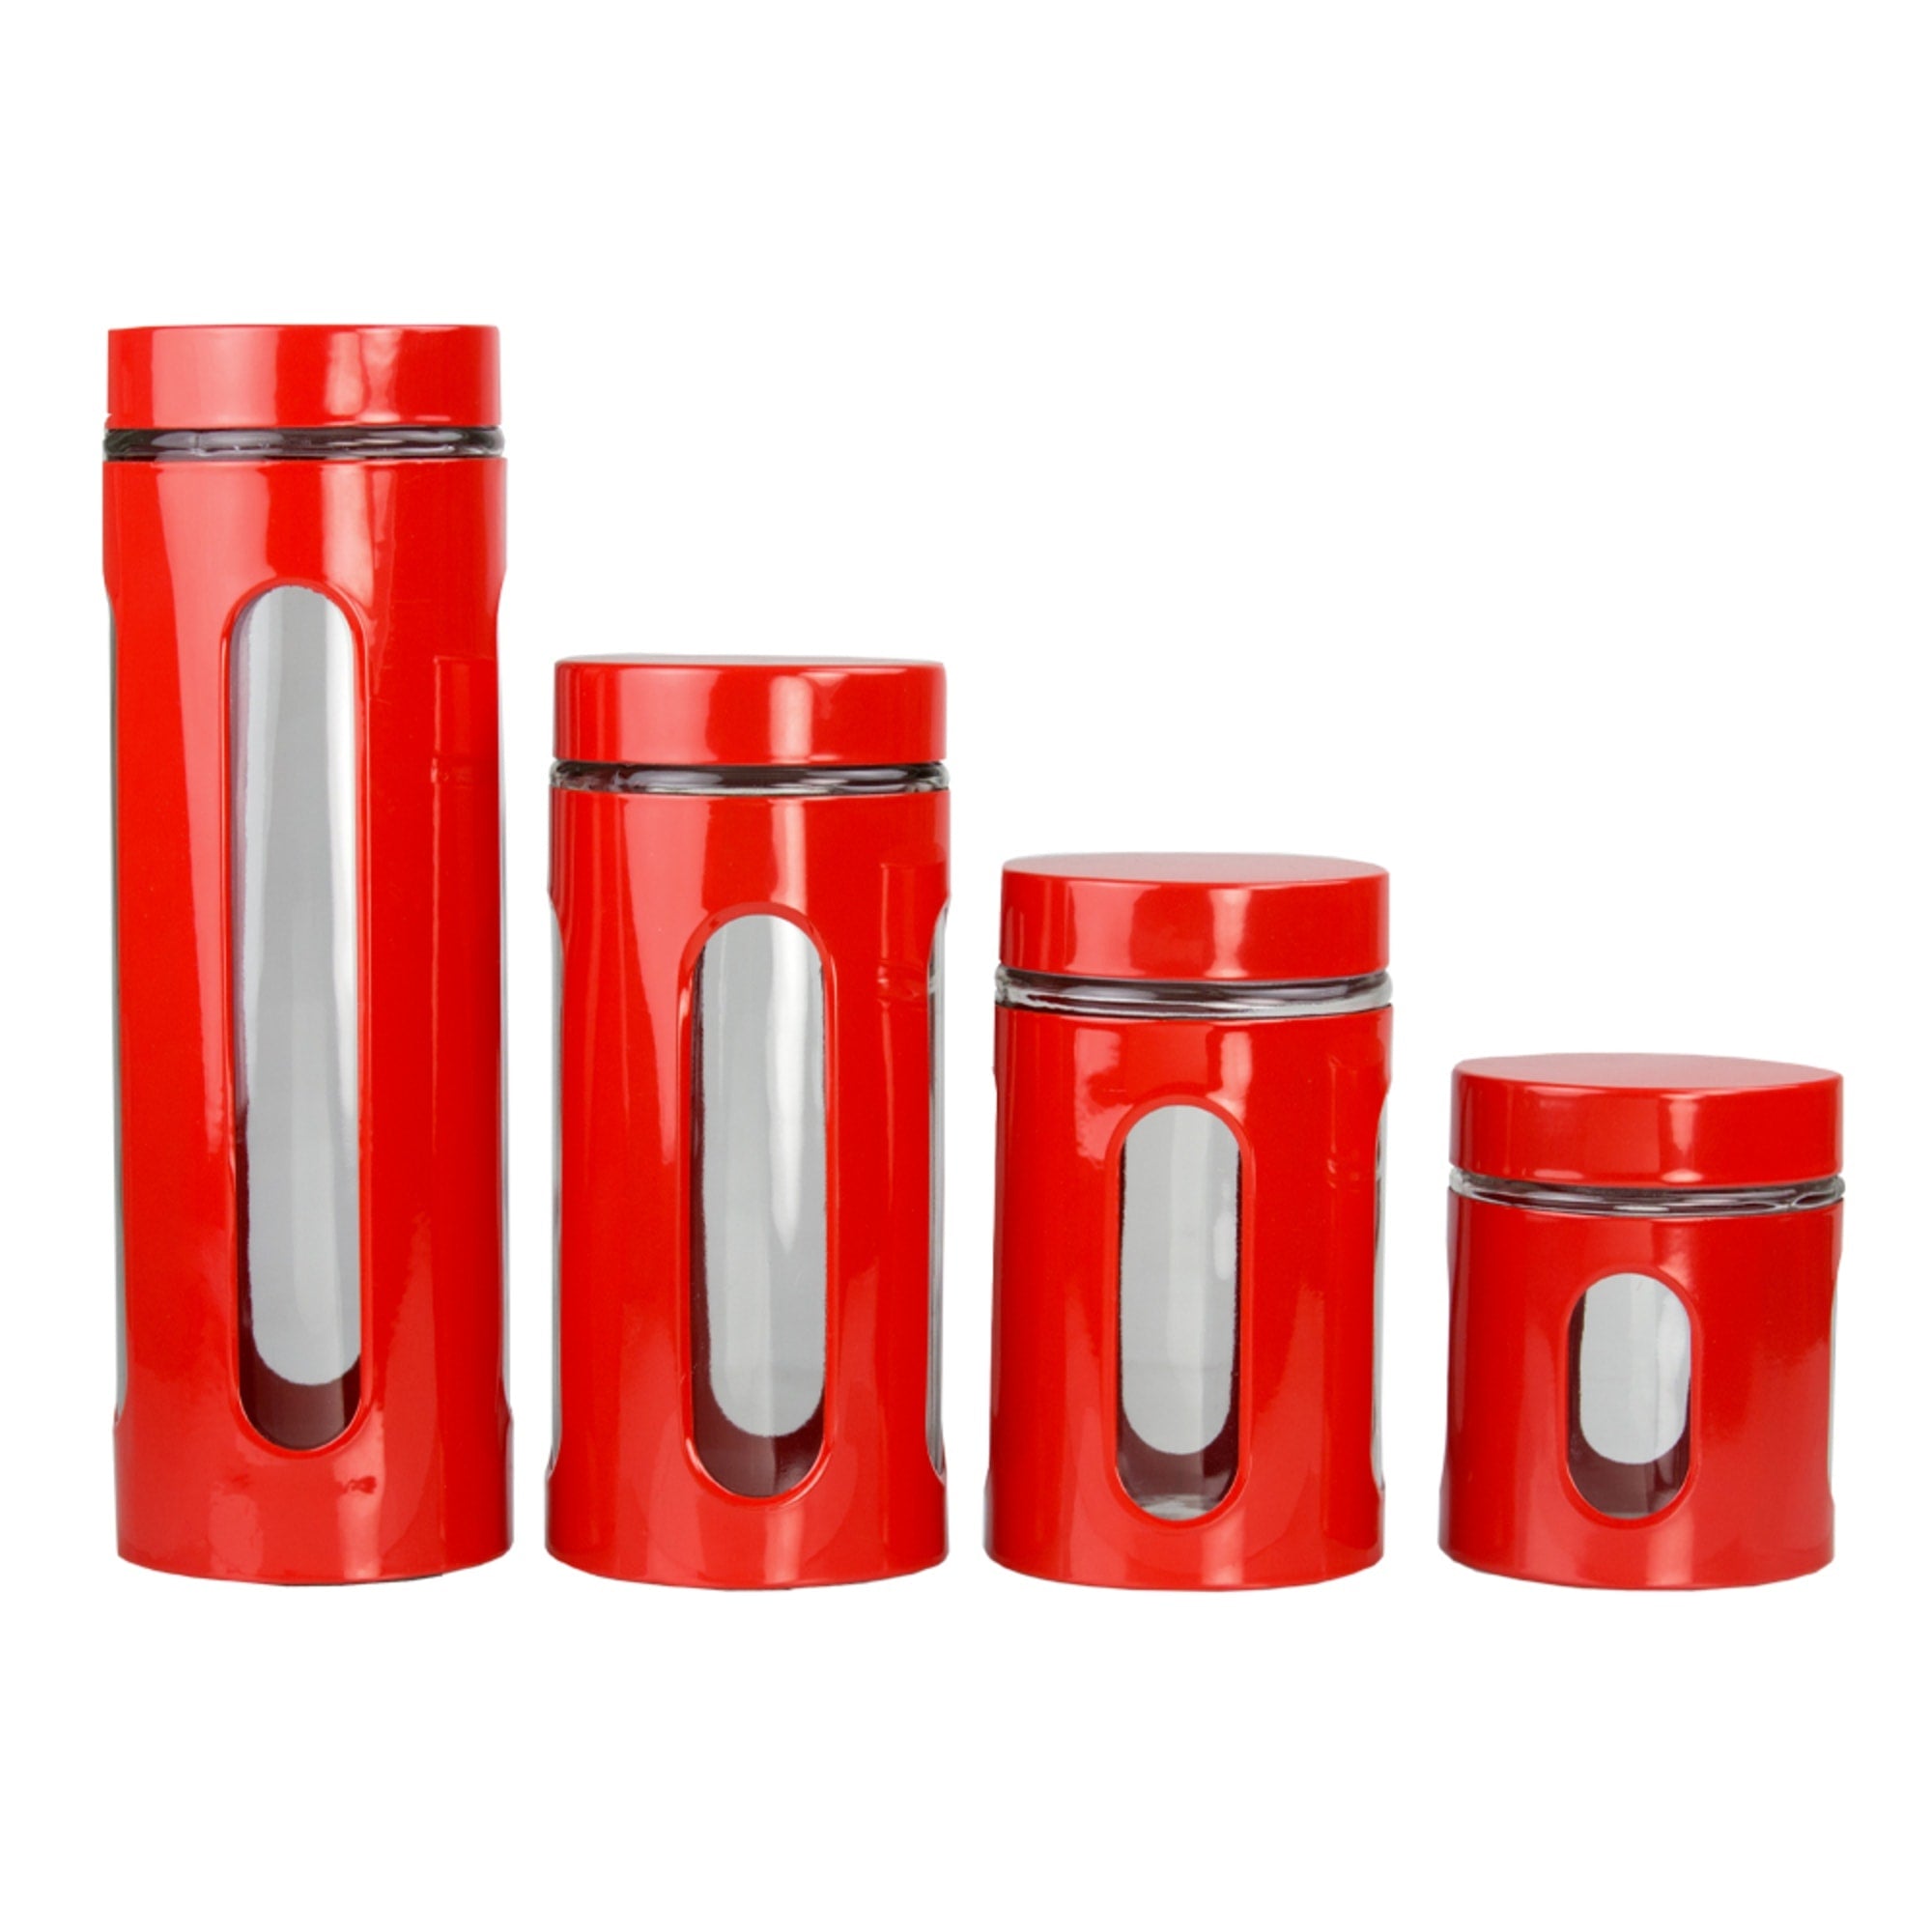 Home Basics 4 Piece Essence Collection Metal Canister Set, Red $12.00 EACH, CASE PACK OF 4